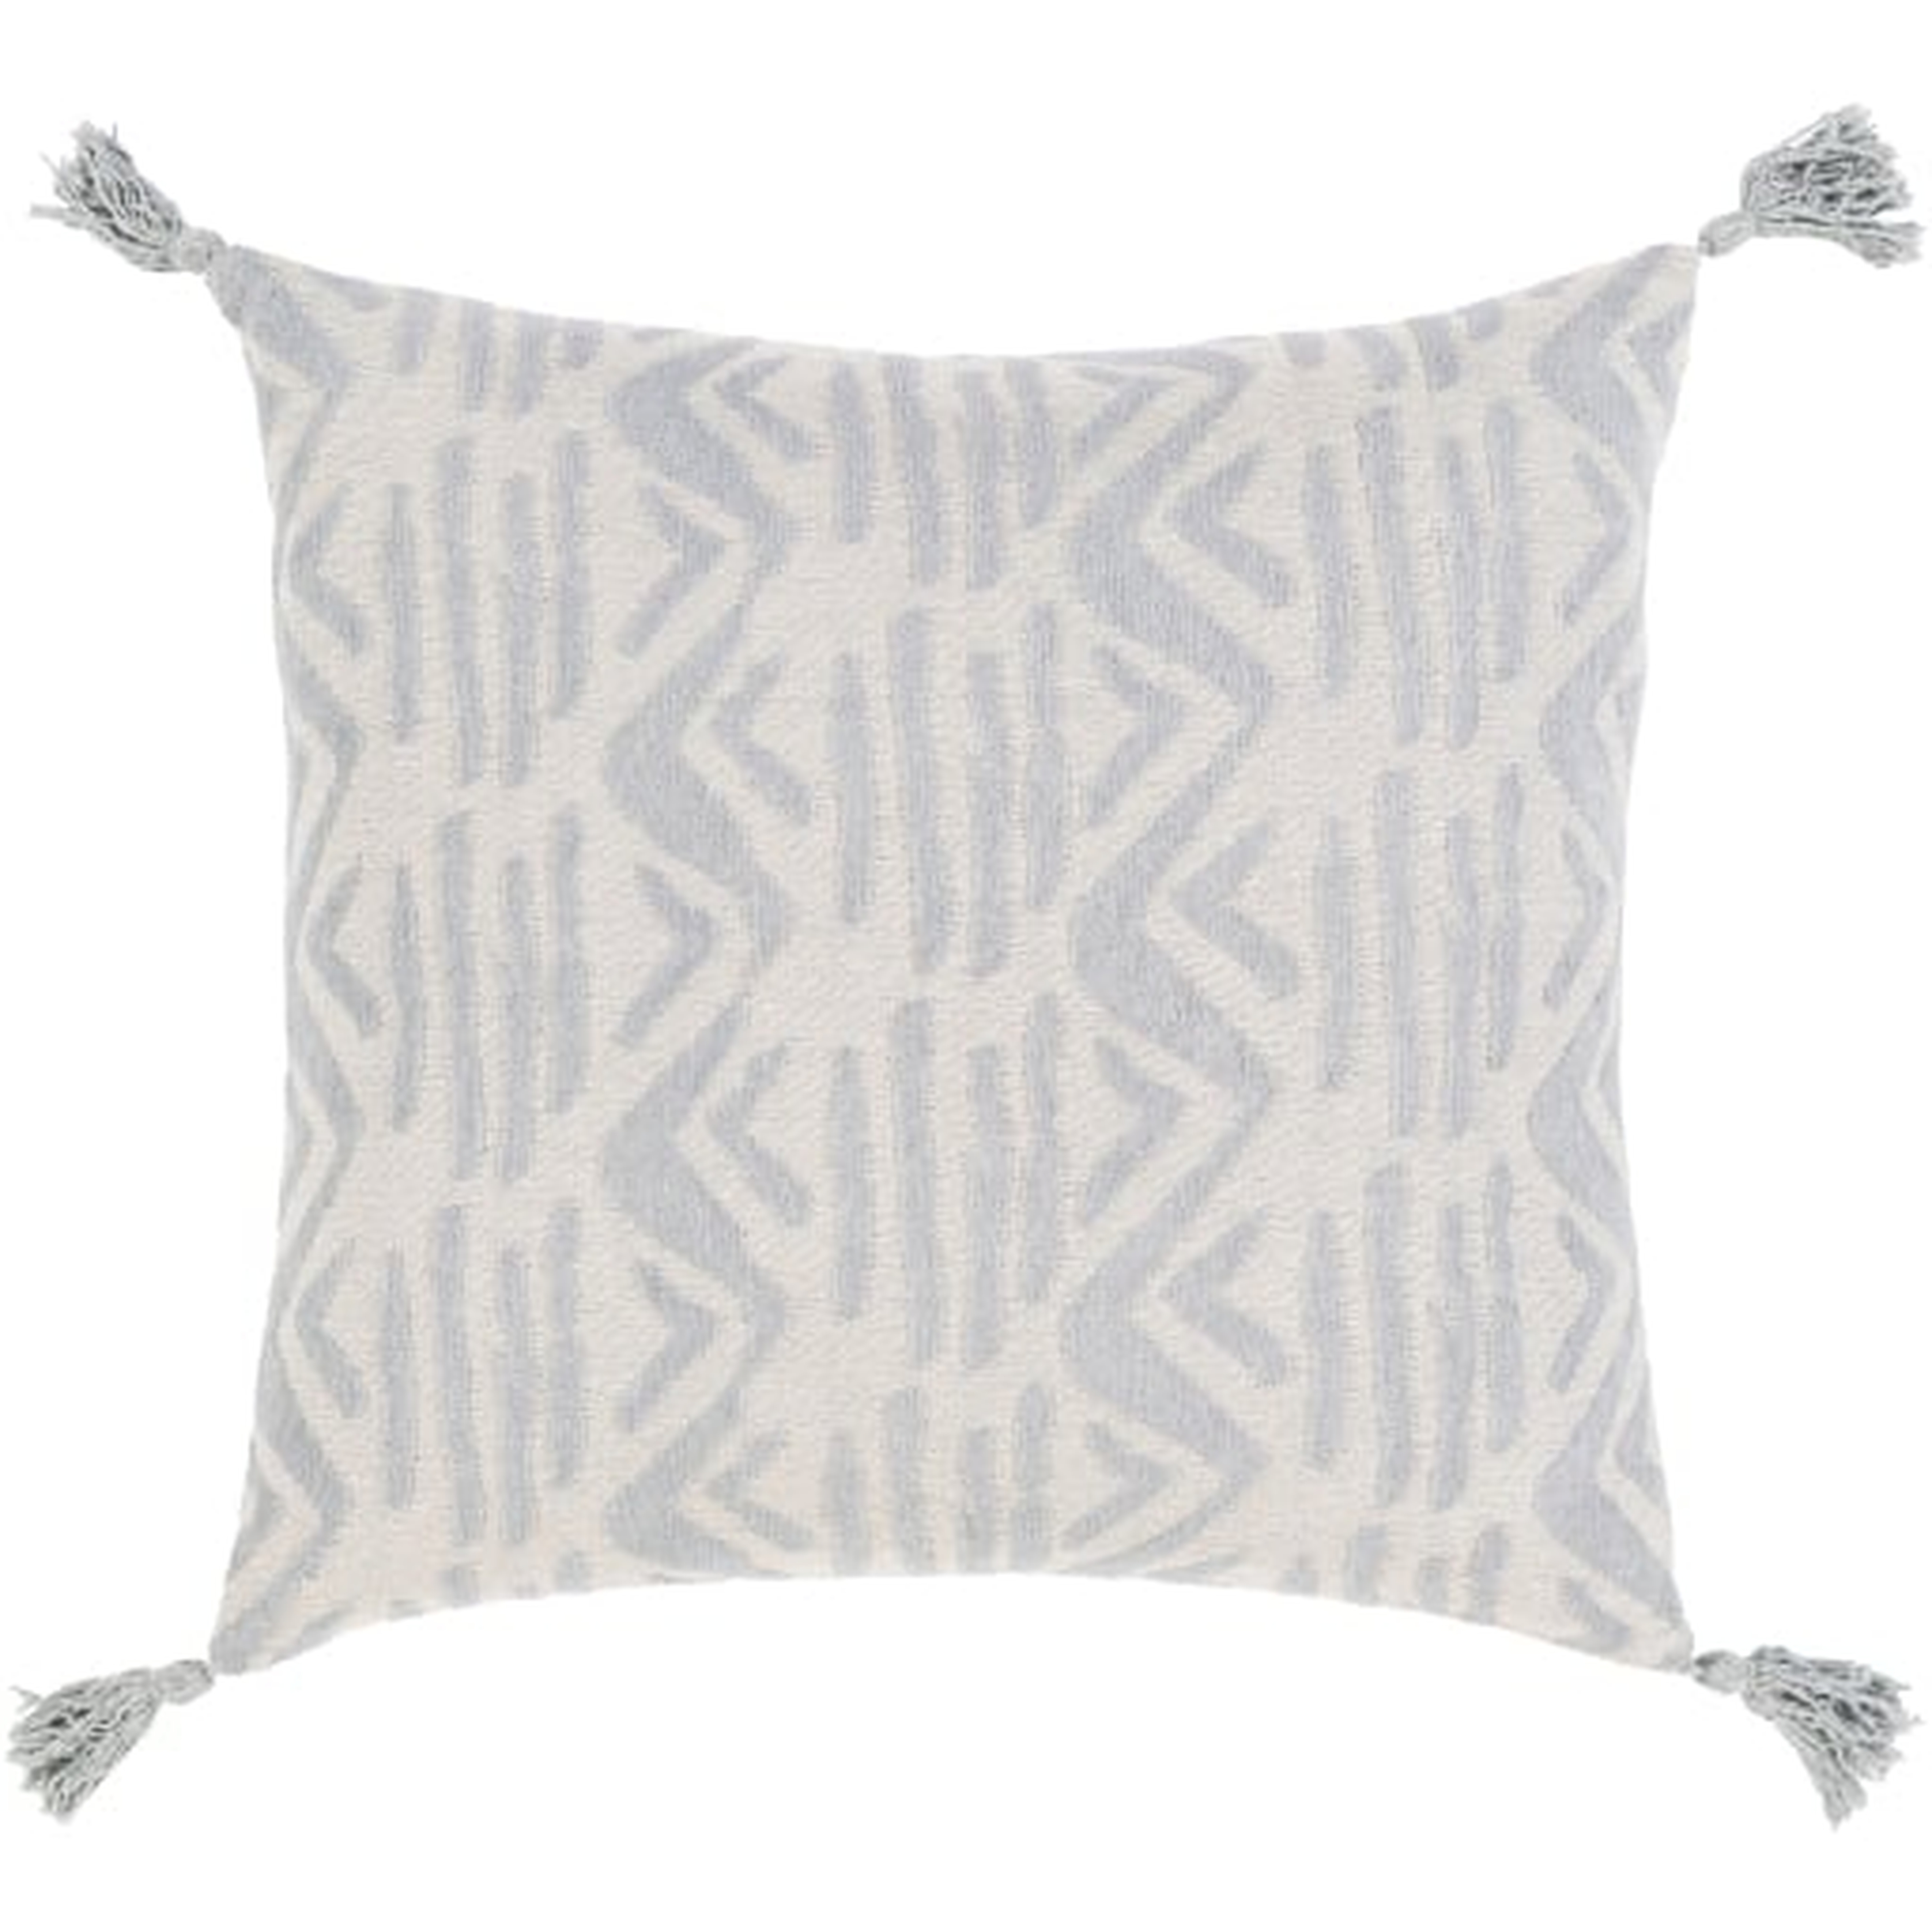 Hadlee Dash Pillow, 20" x 20", Gray with Polyester Insert - Cove Goods